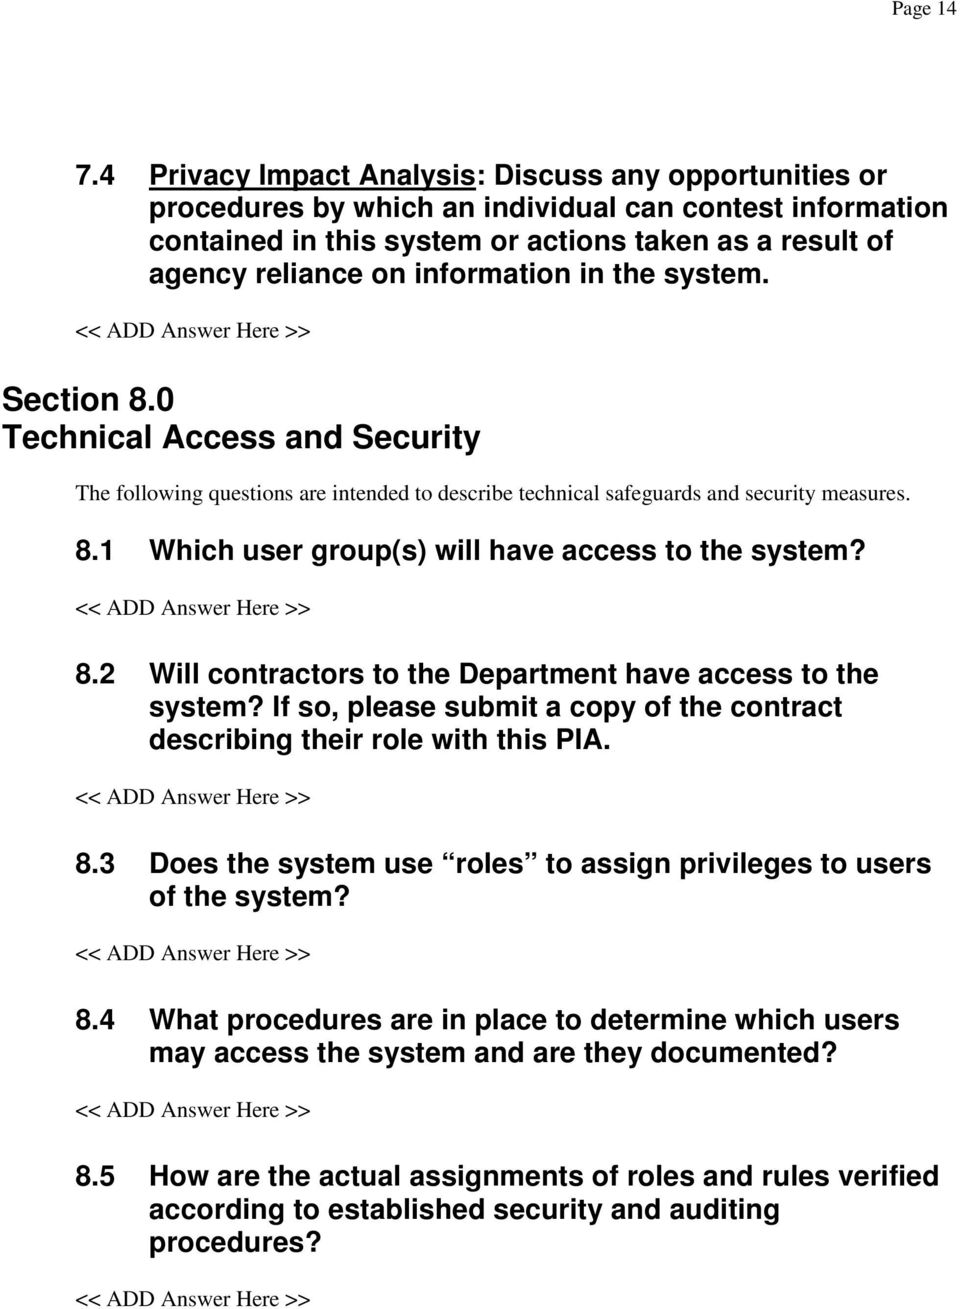 information in the system. Section 8.0 Technical Access and Security The following questions are intended to describe technical safeguards and security measures. 8.1 Which user group(s) will have access to the system?